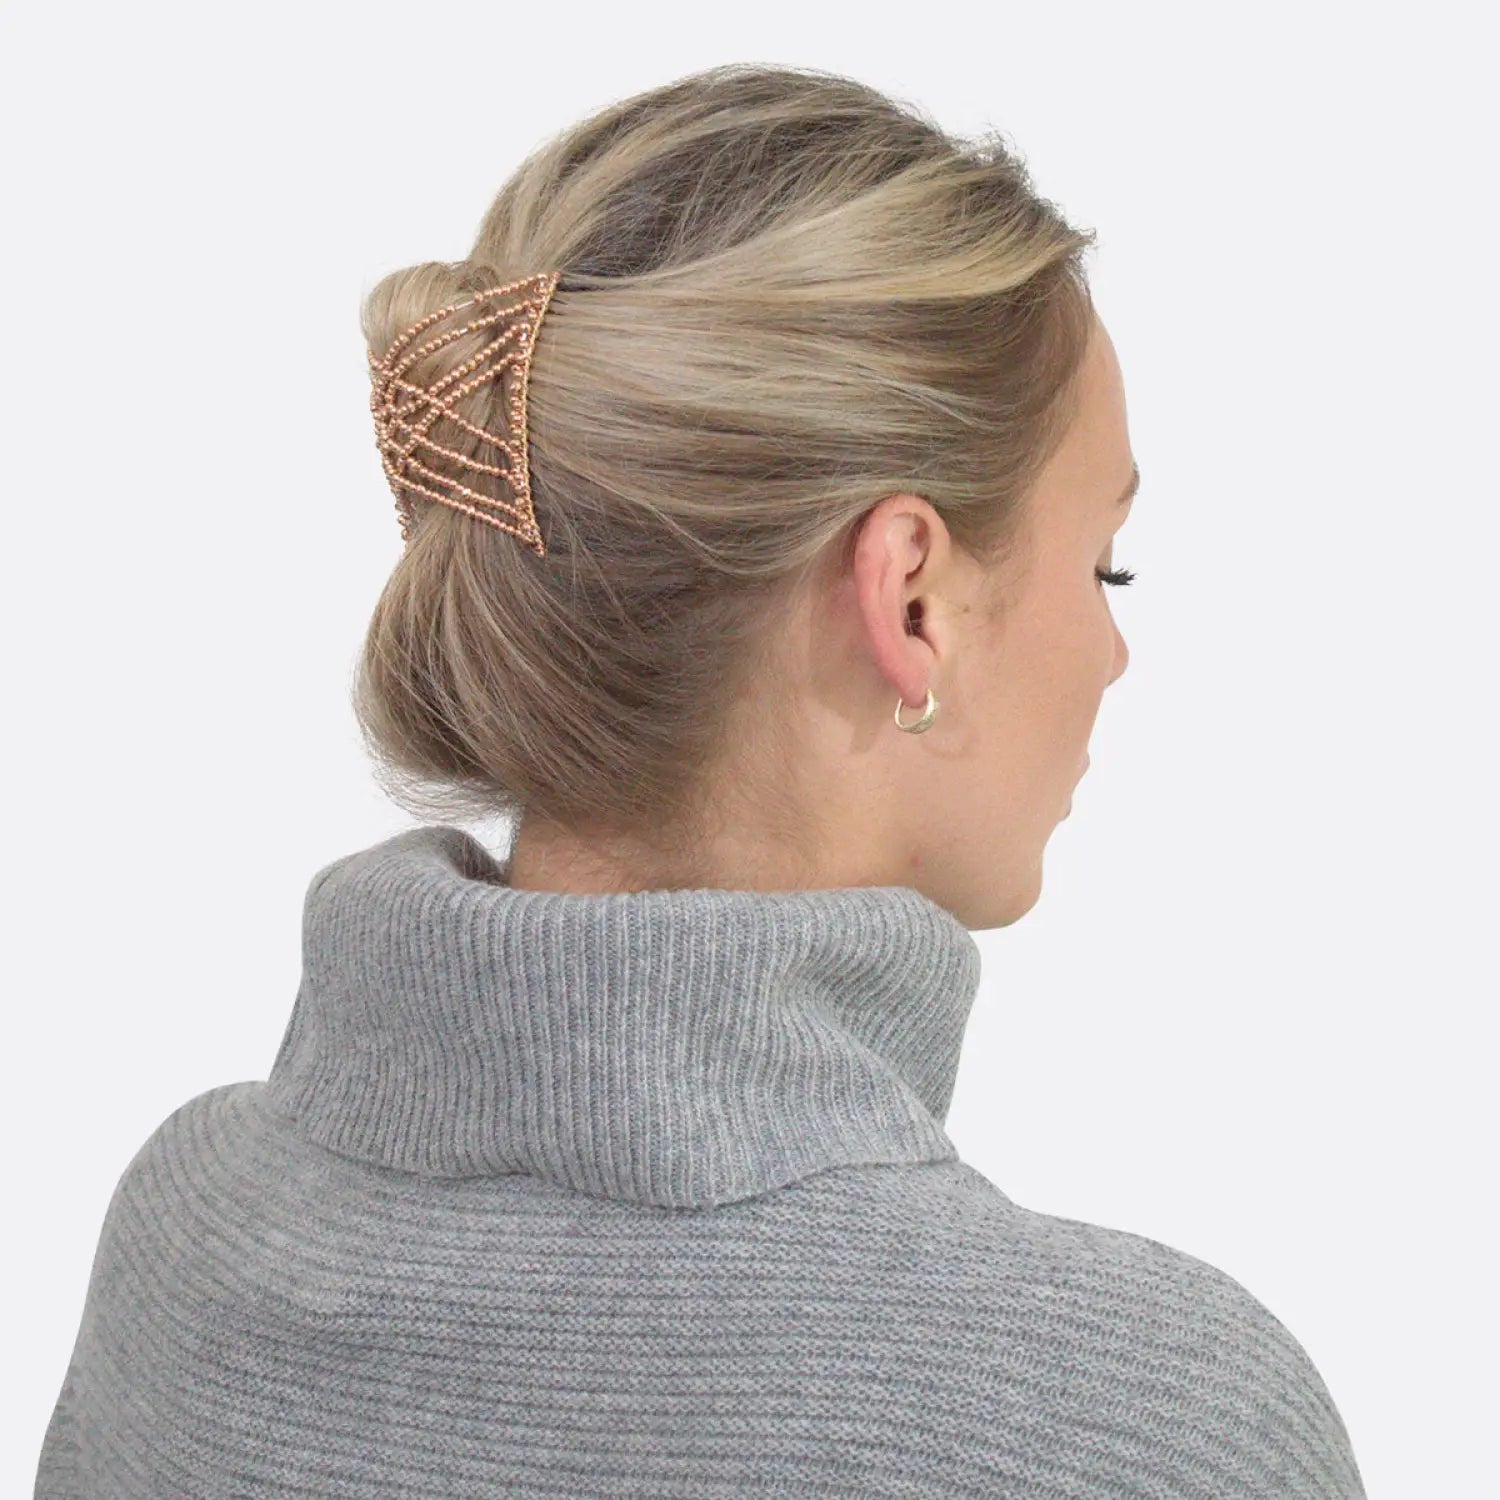 Woman wearing grey sweater with gold hair clip, showcasing Glossy Beaded Design Hair Accessory Magic Comb.